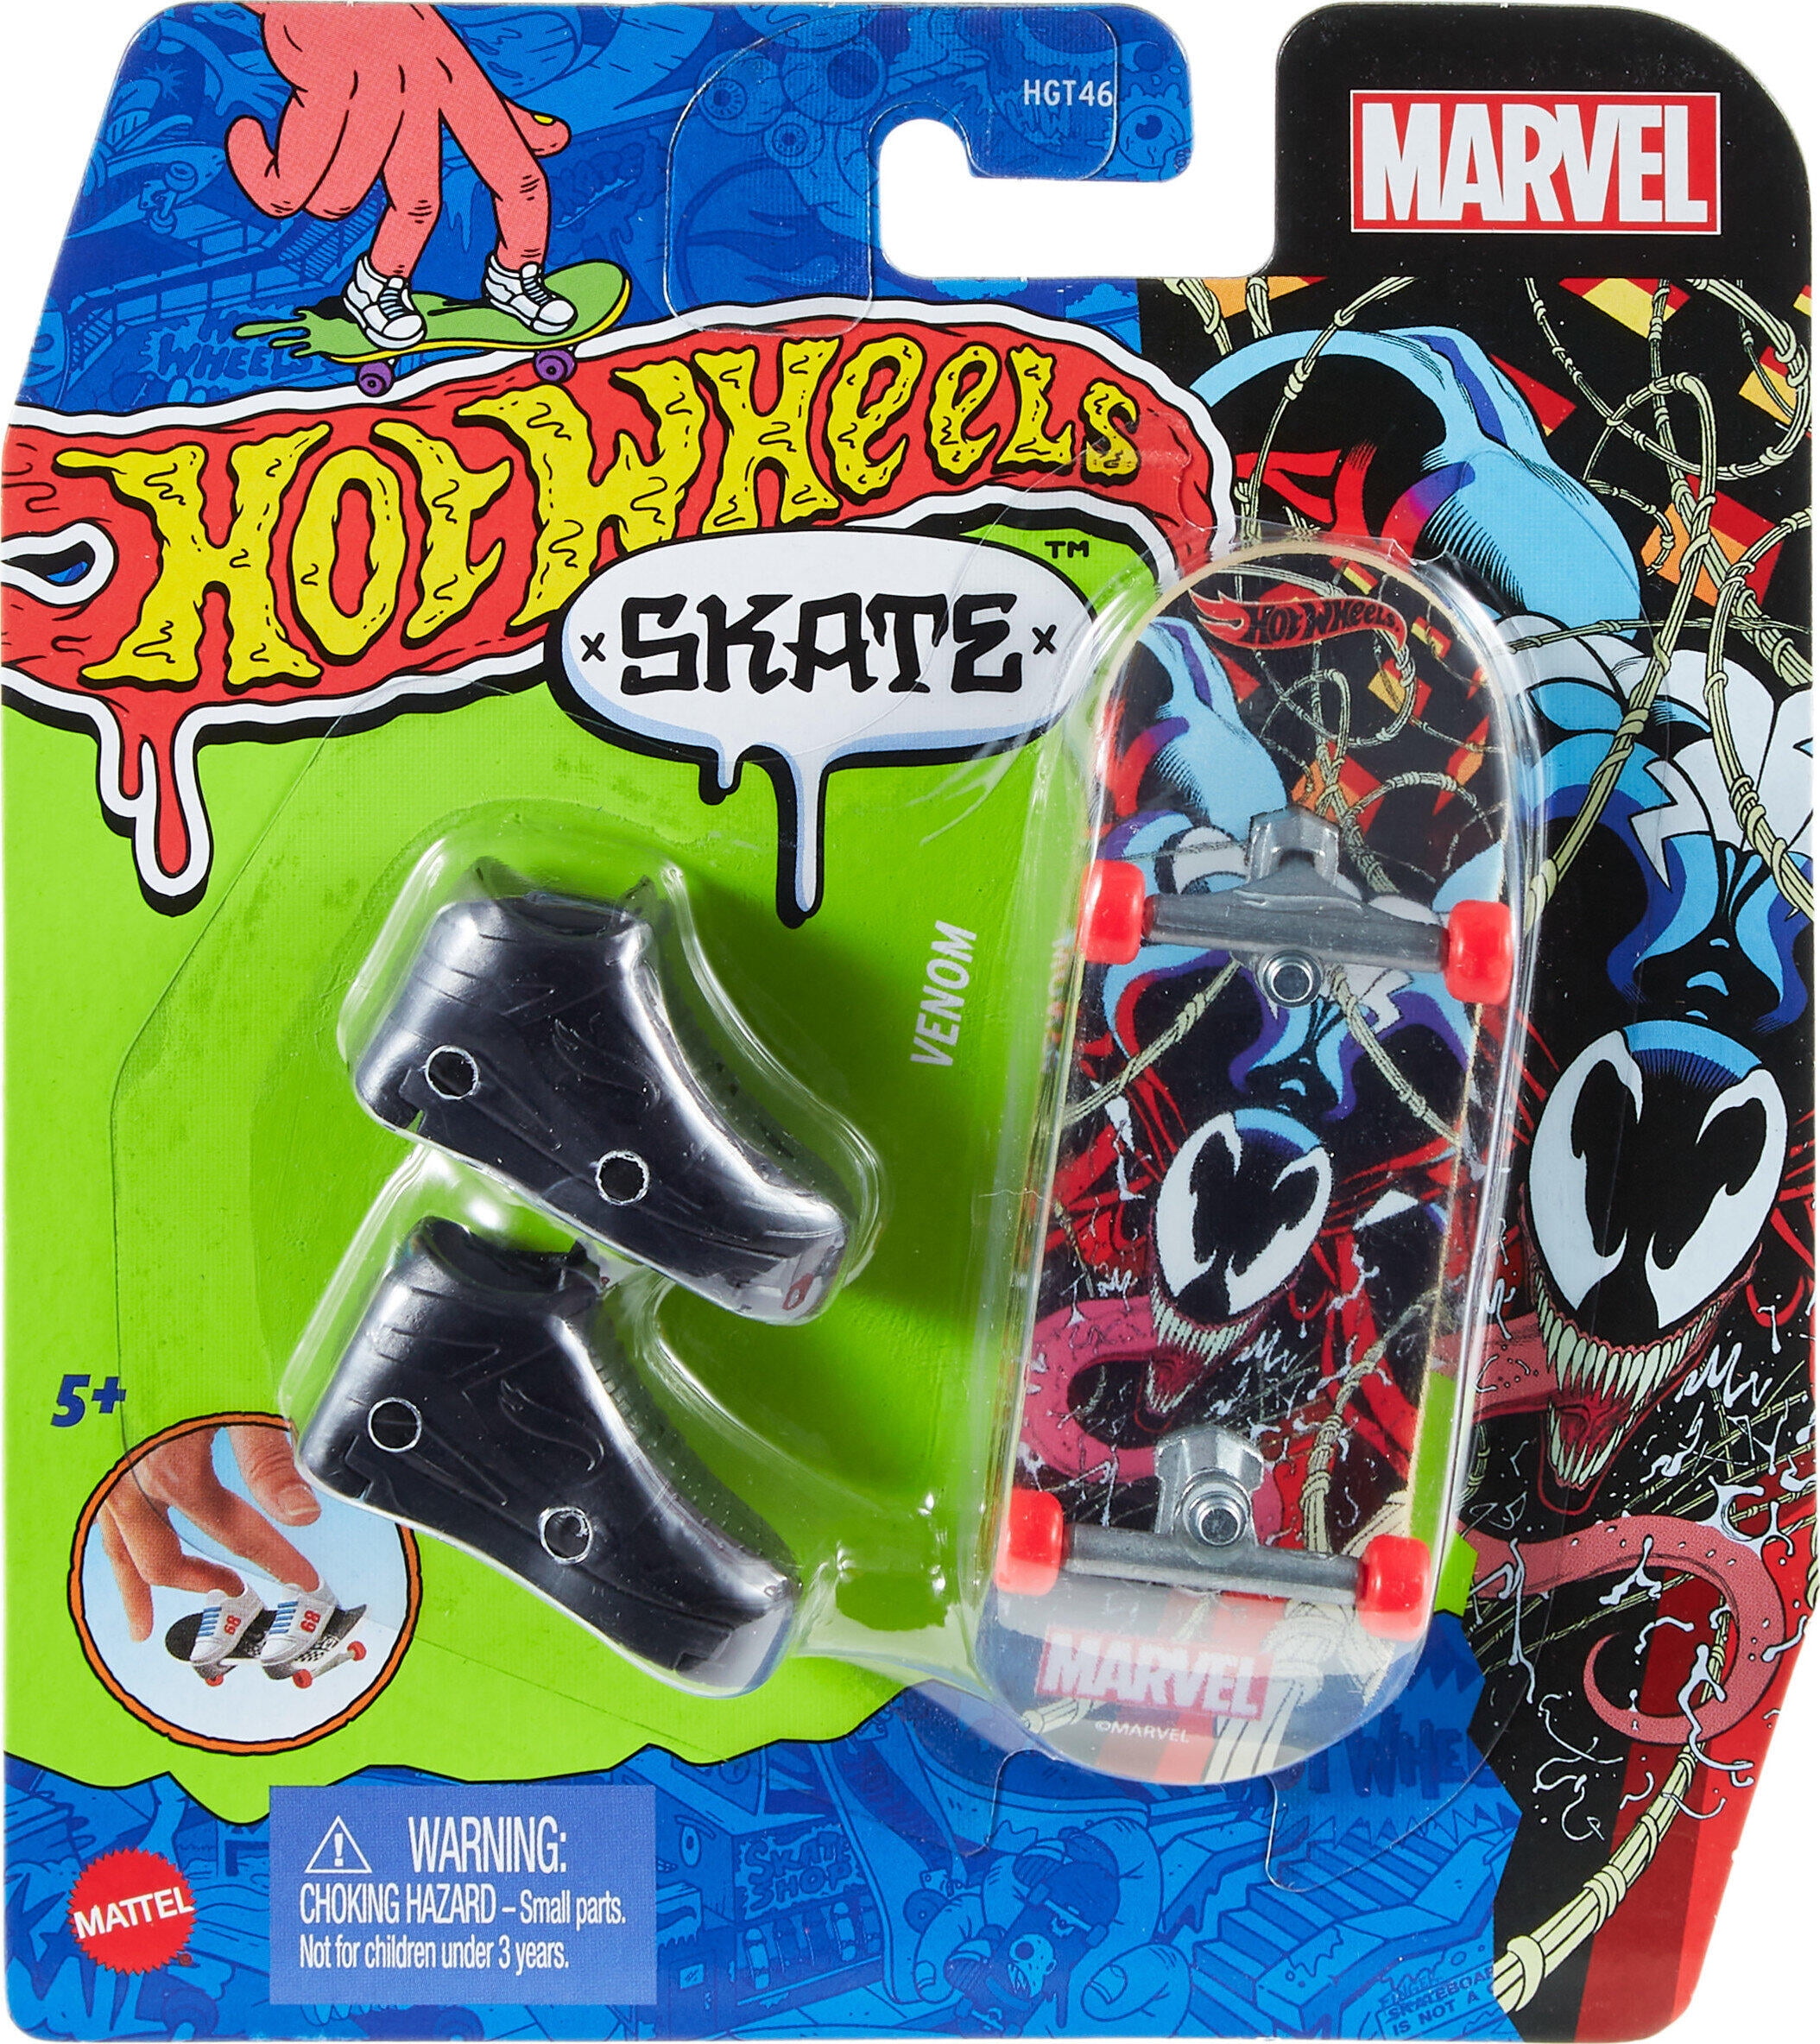 Hot Wheels Skate Tony Hawk Fingerboard & Skate Shoes, Toy for Kids (styles May Vary), Size: One Size